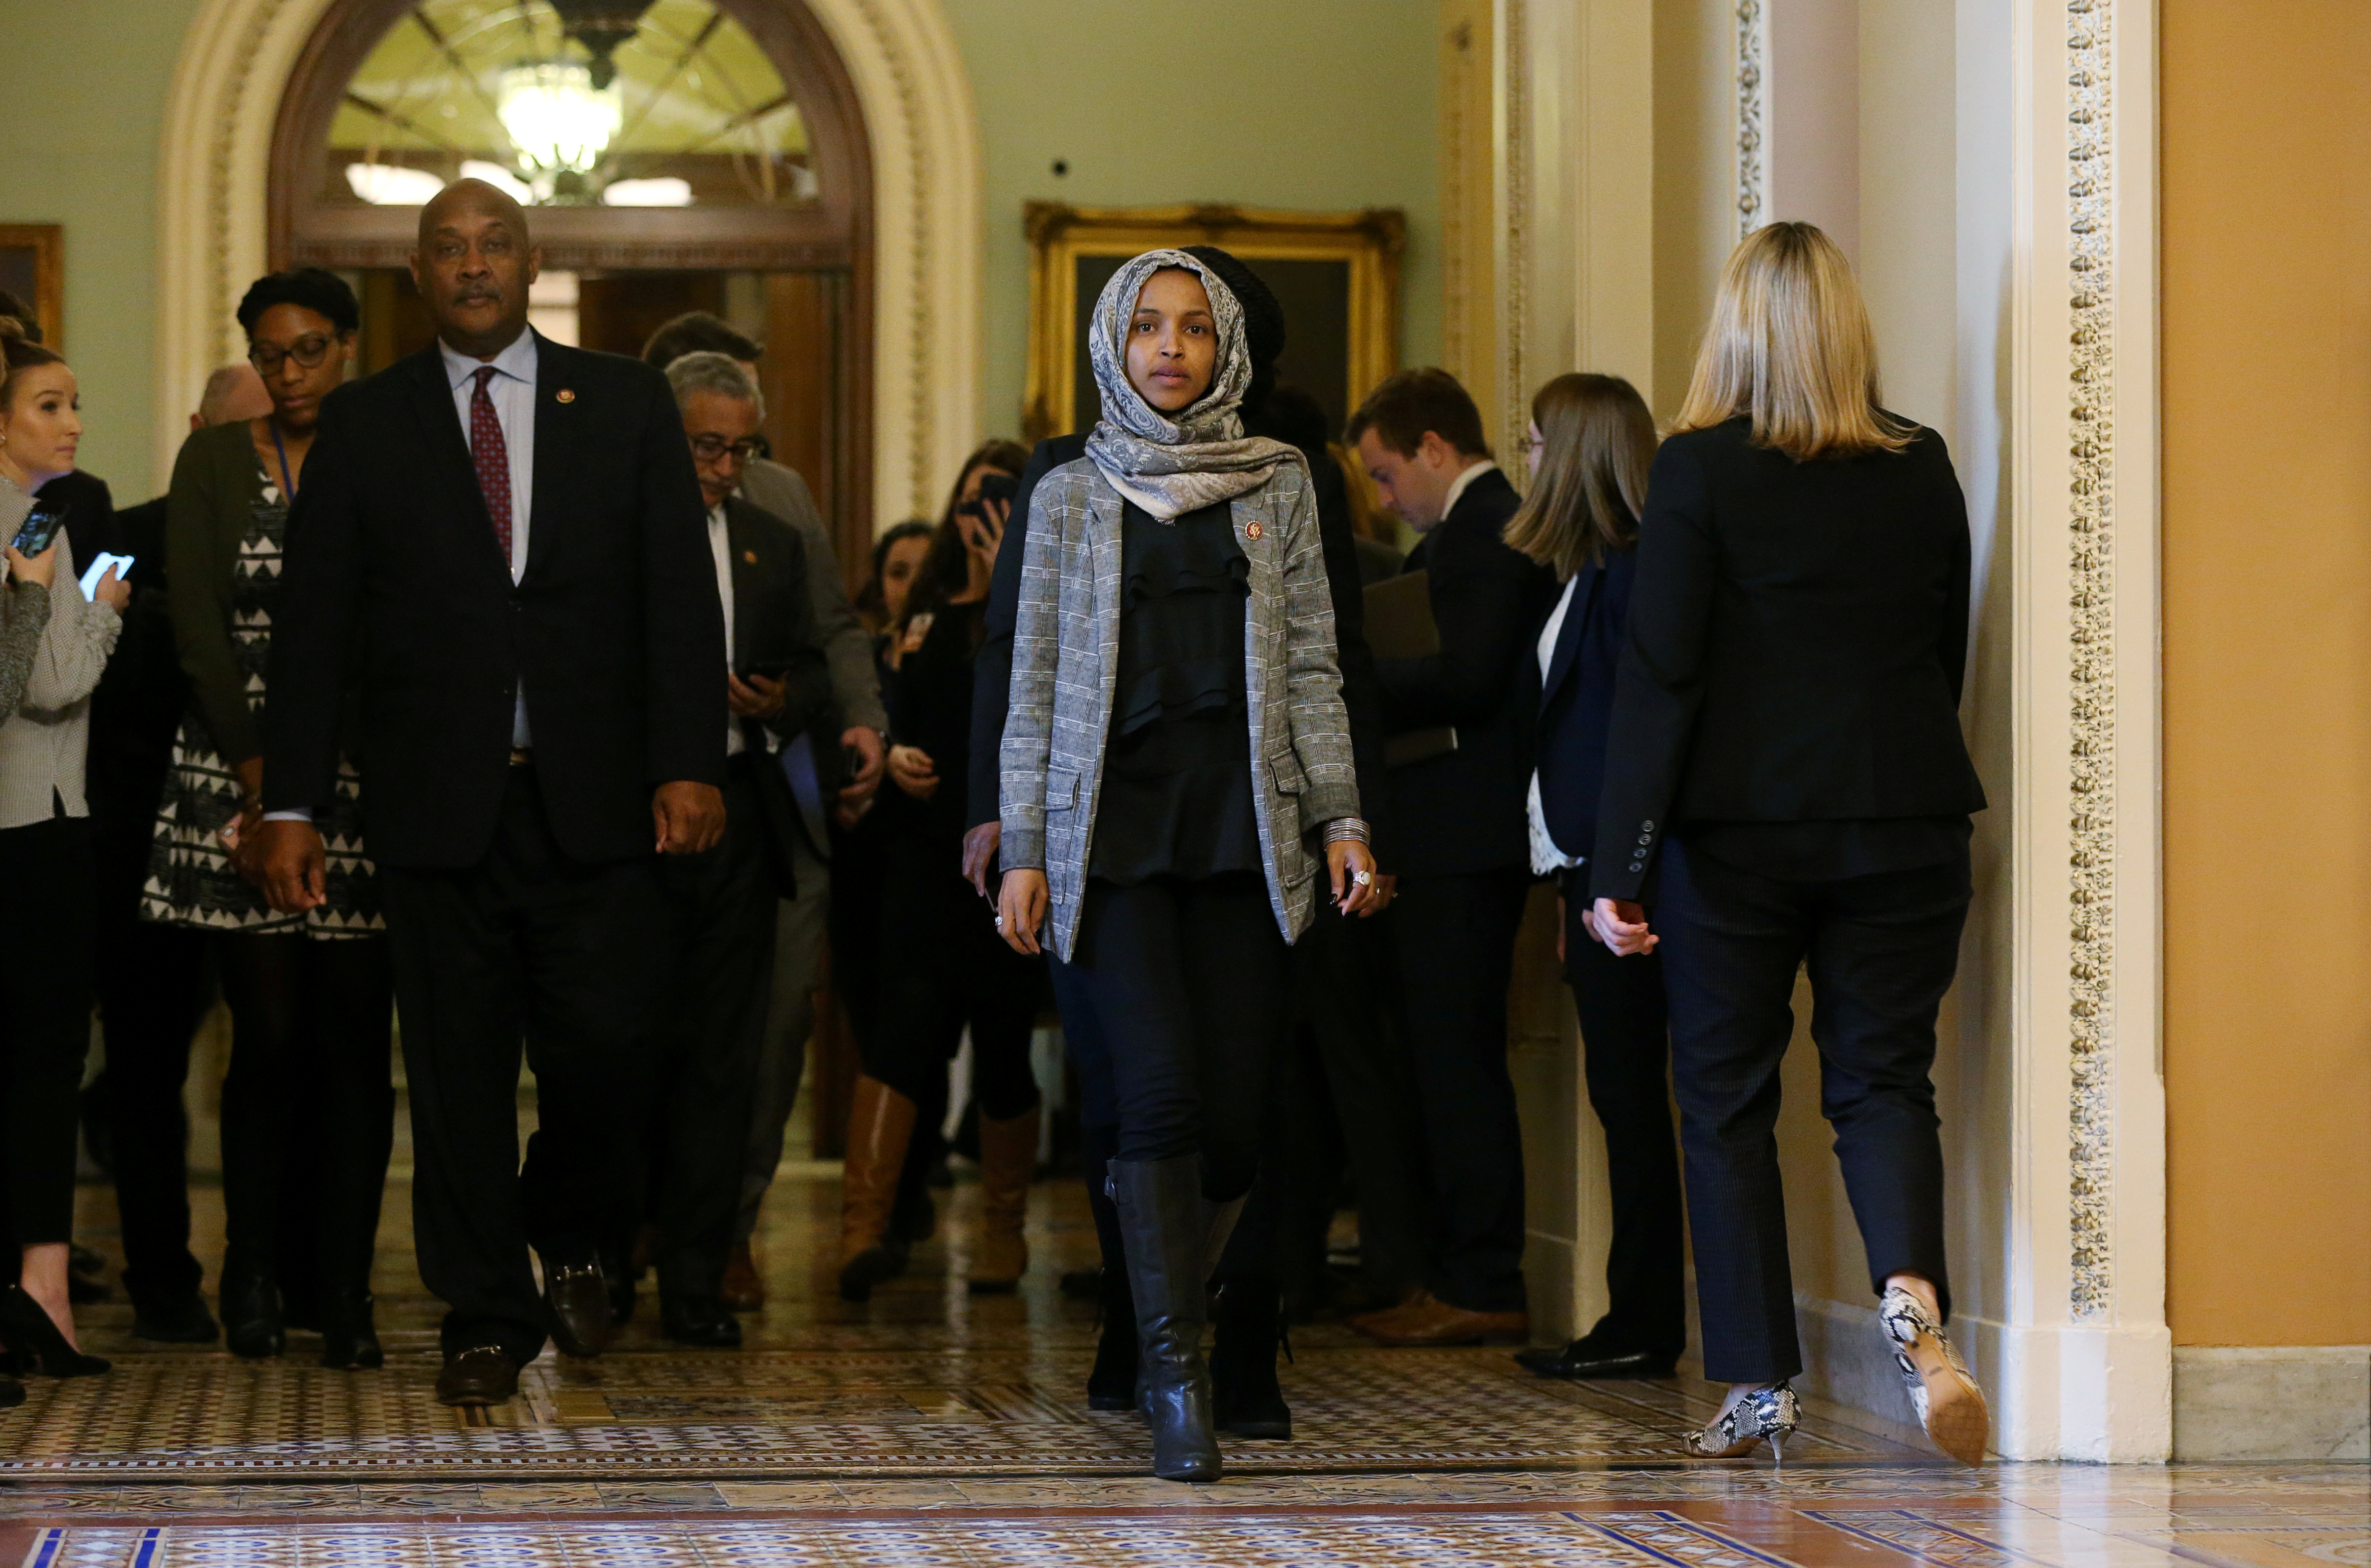 FILE PHOTO: U.S. Rep. Ilhan Omar (D-MN) leaves the U.S. Senate chamber and walks back to the House of Representatives side of the Capitol with colleagues after watching the failure of both competing Republican and Democratic proposals to end the partial government shutdown in back to back votes on Capitol Hill in Washington, U.S., January 24, 2019. REUTERS/Leah Millis/File Photo